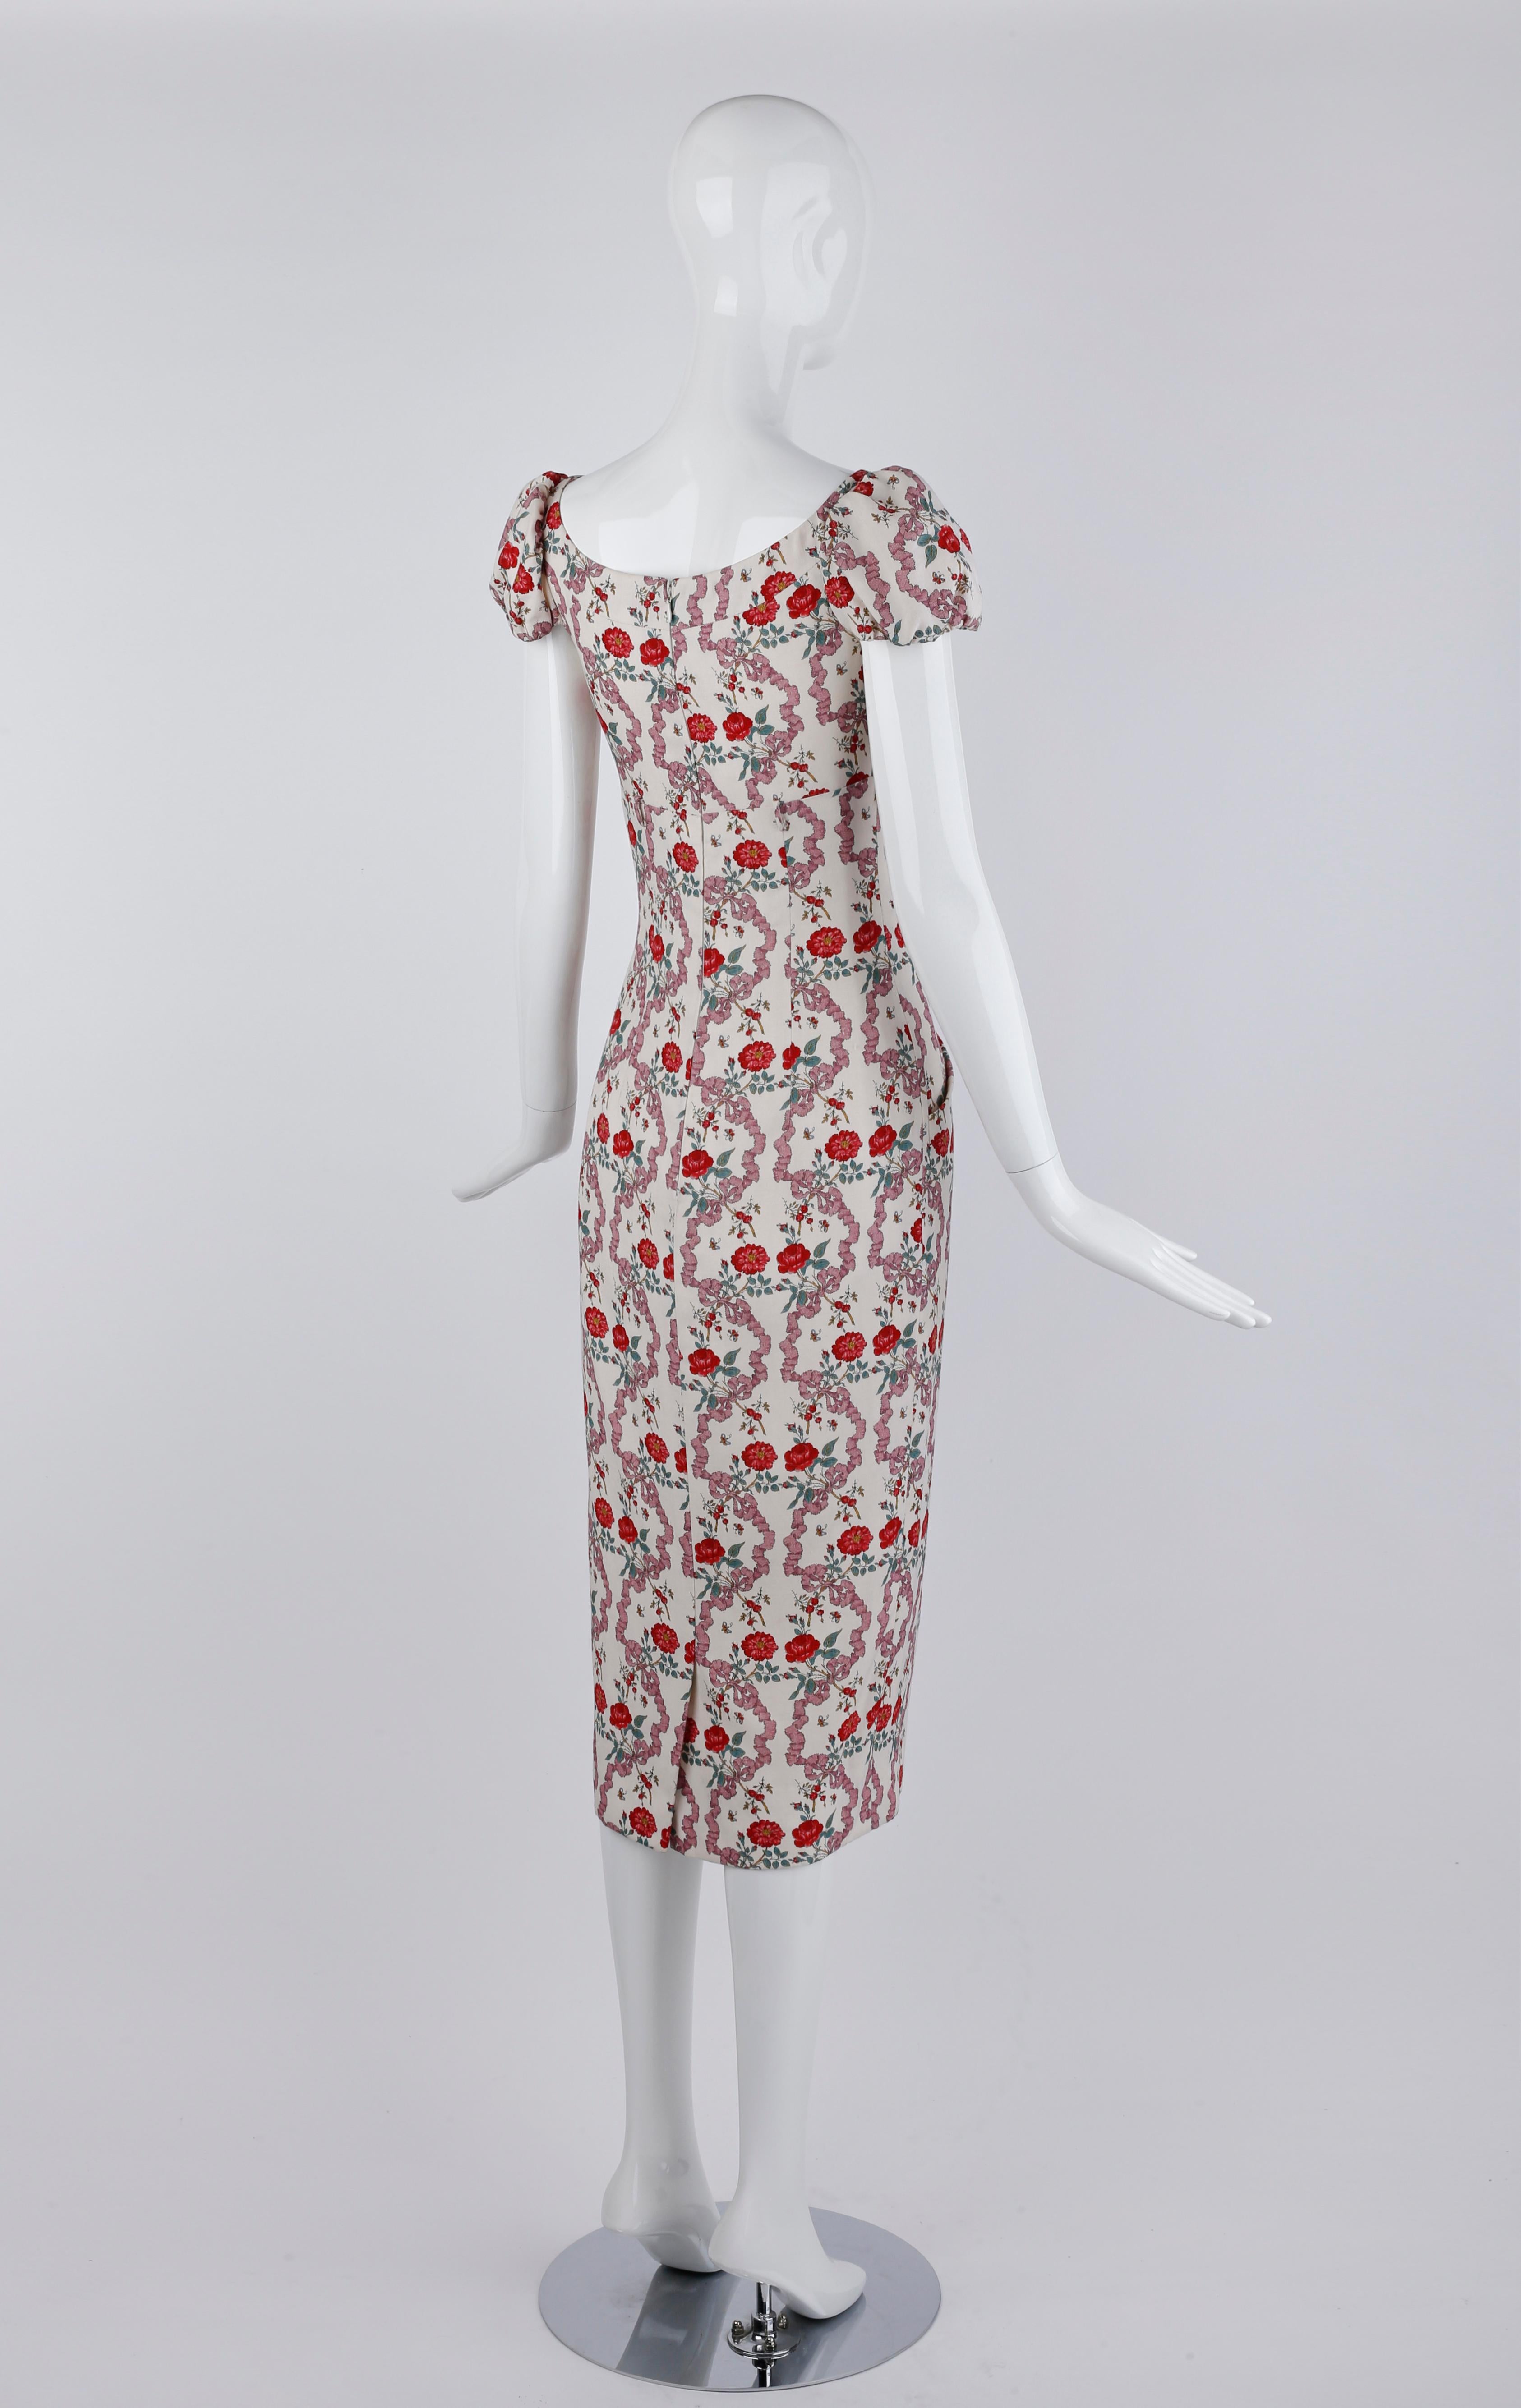 Givenchy Couture John Galliano S/S 1997 Bouquet Floral Ribbon Print Midi Dress For Sale 2